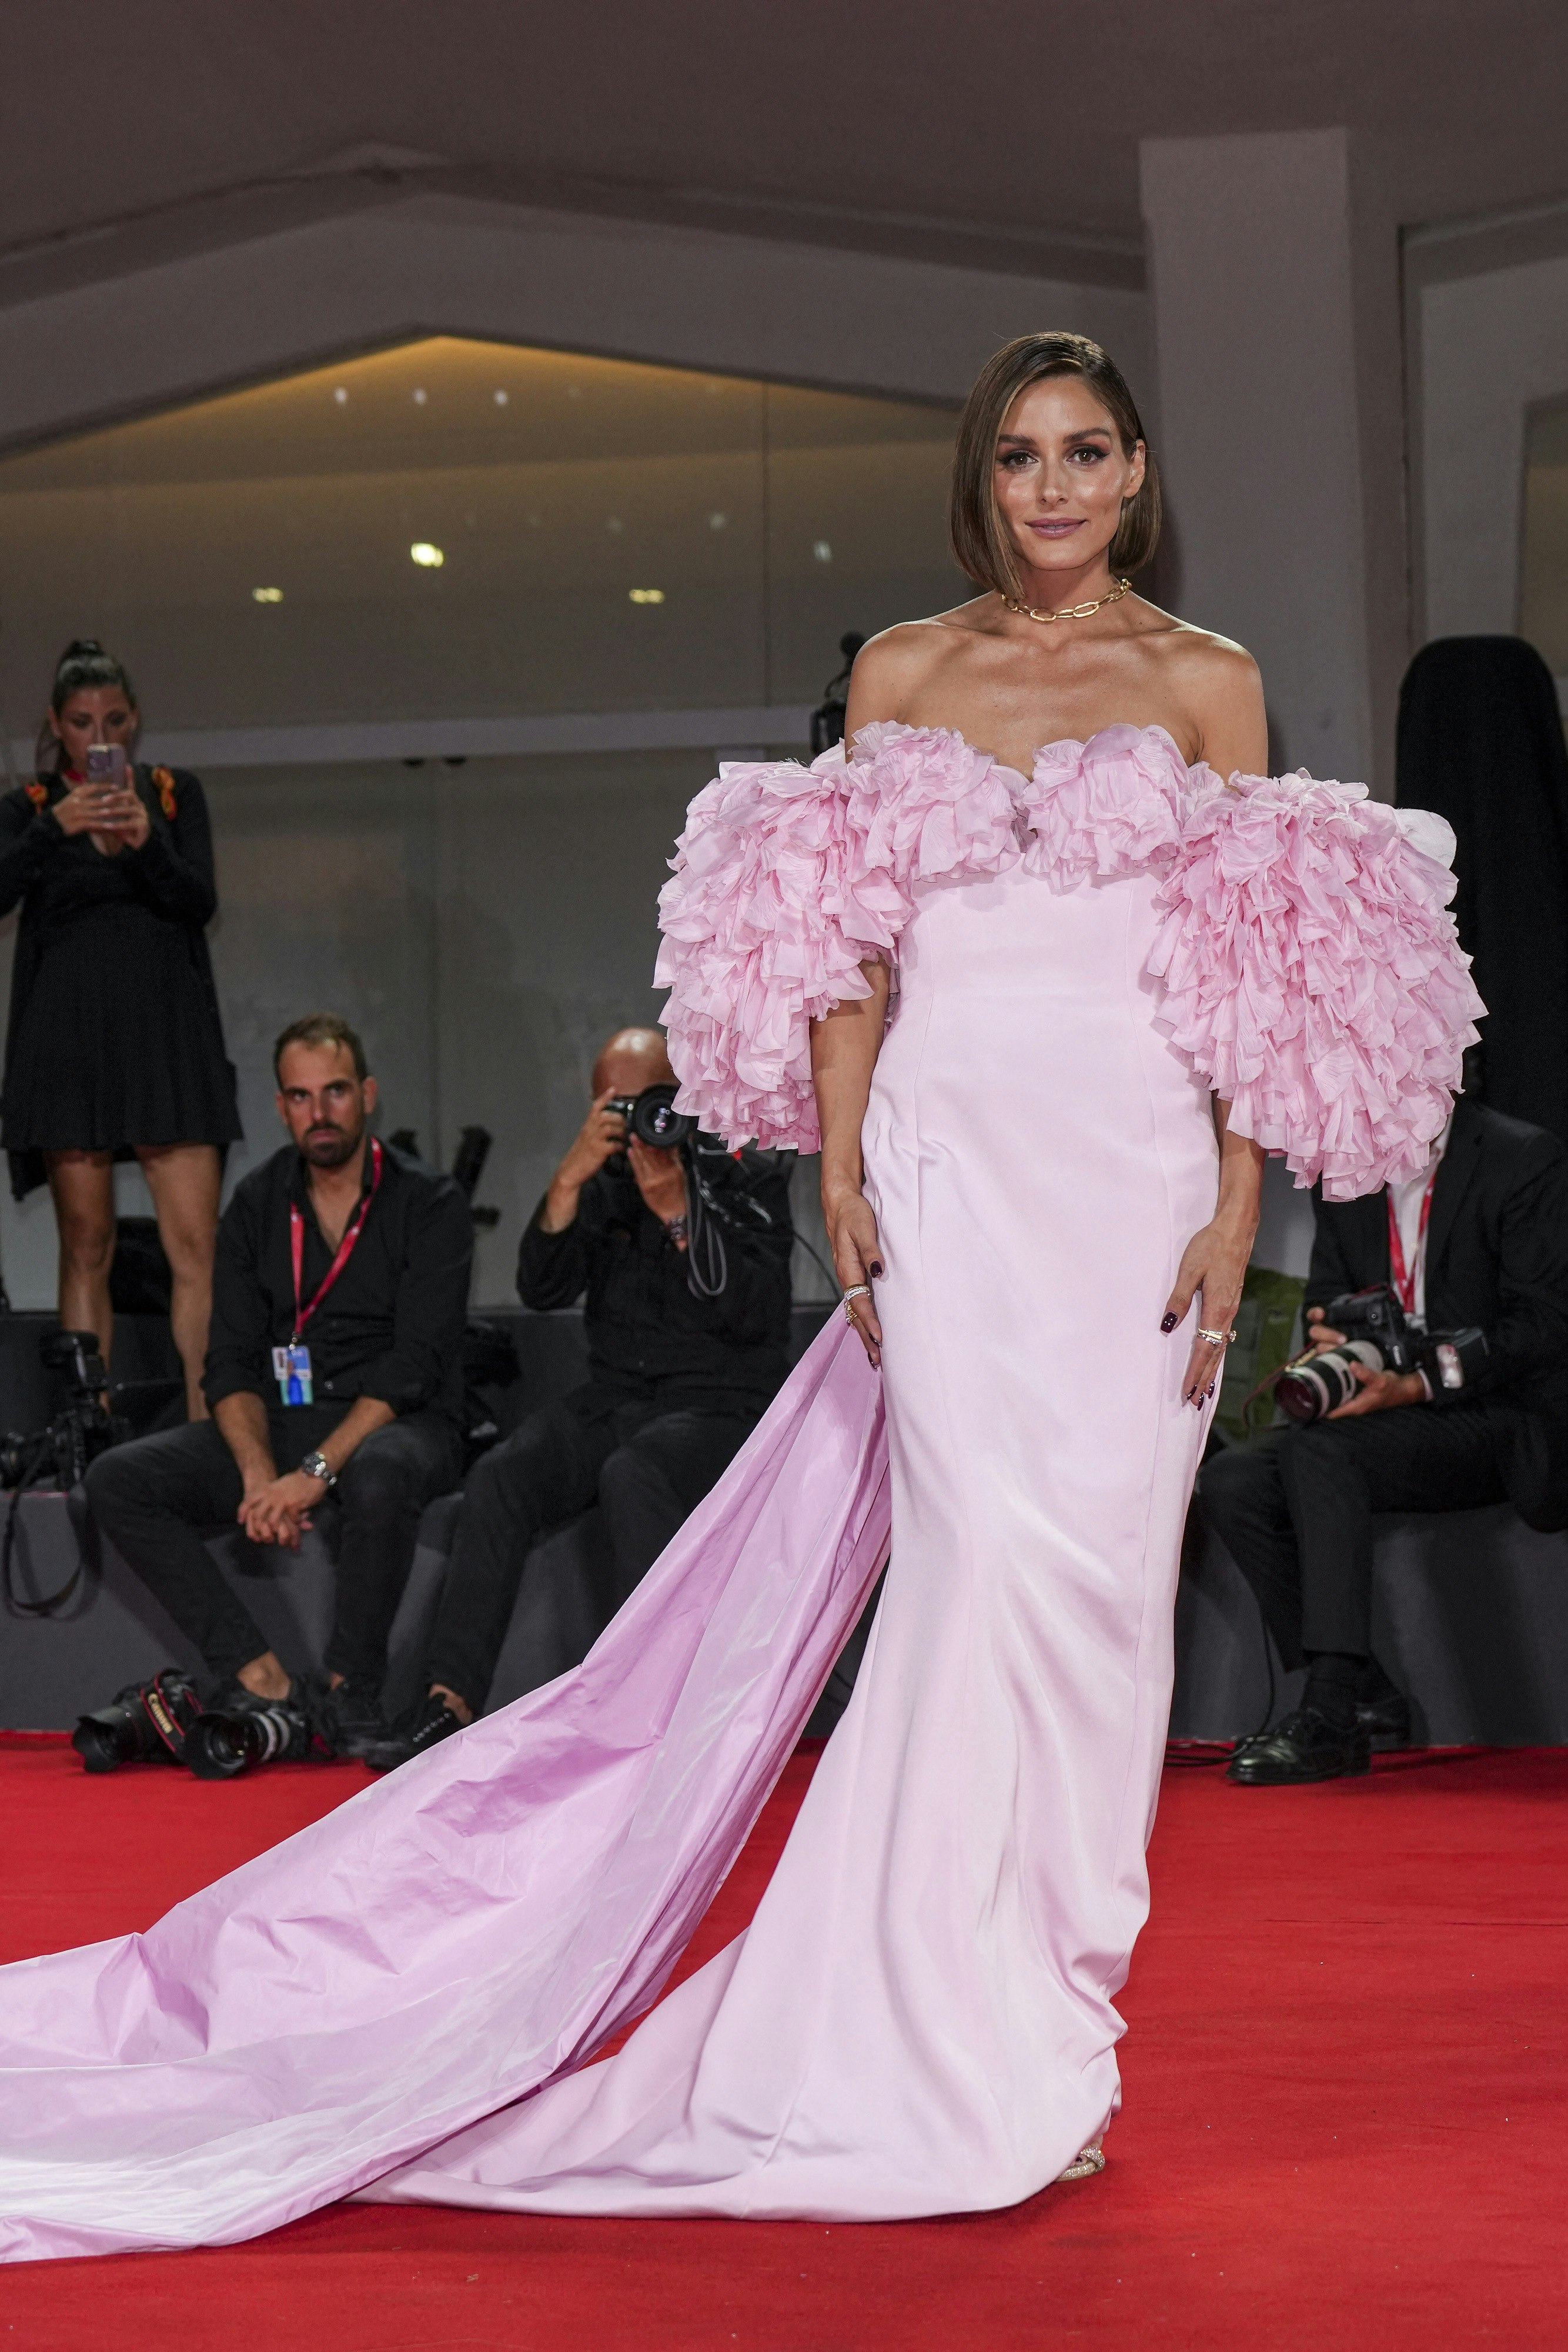 Celebrity on the Red Carpet at the 80th Venice International Film Festival in Venice, Italy, on September 01, 2023. 01 Sep 2023 Pictured: Olivia Palermo. Photo credit: Stefano Costantino / MEGA TheMegaAgency.com +1 888 505 6342 (Mega Agency TagID: MEGA1025185_012.jpg) [Photo via Mega Agency]